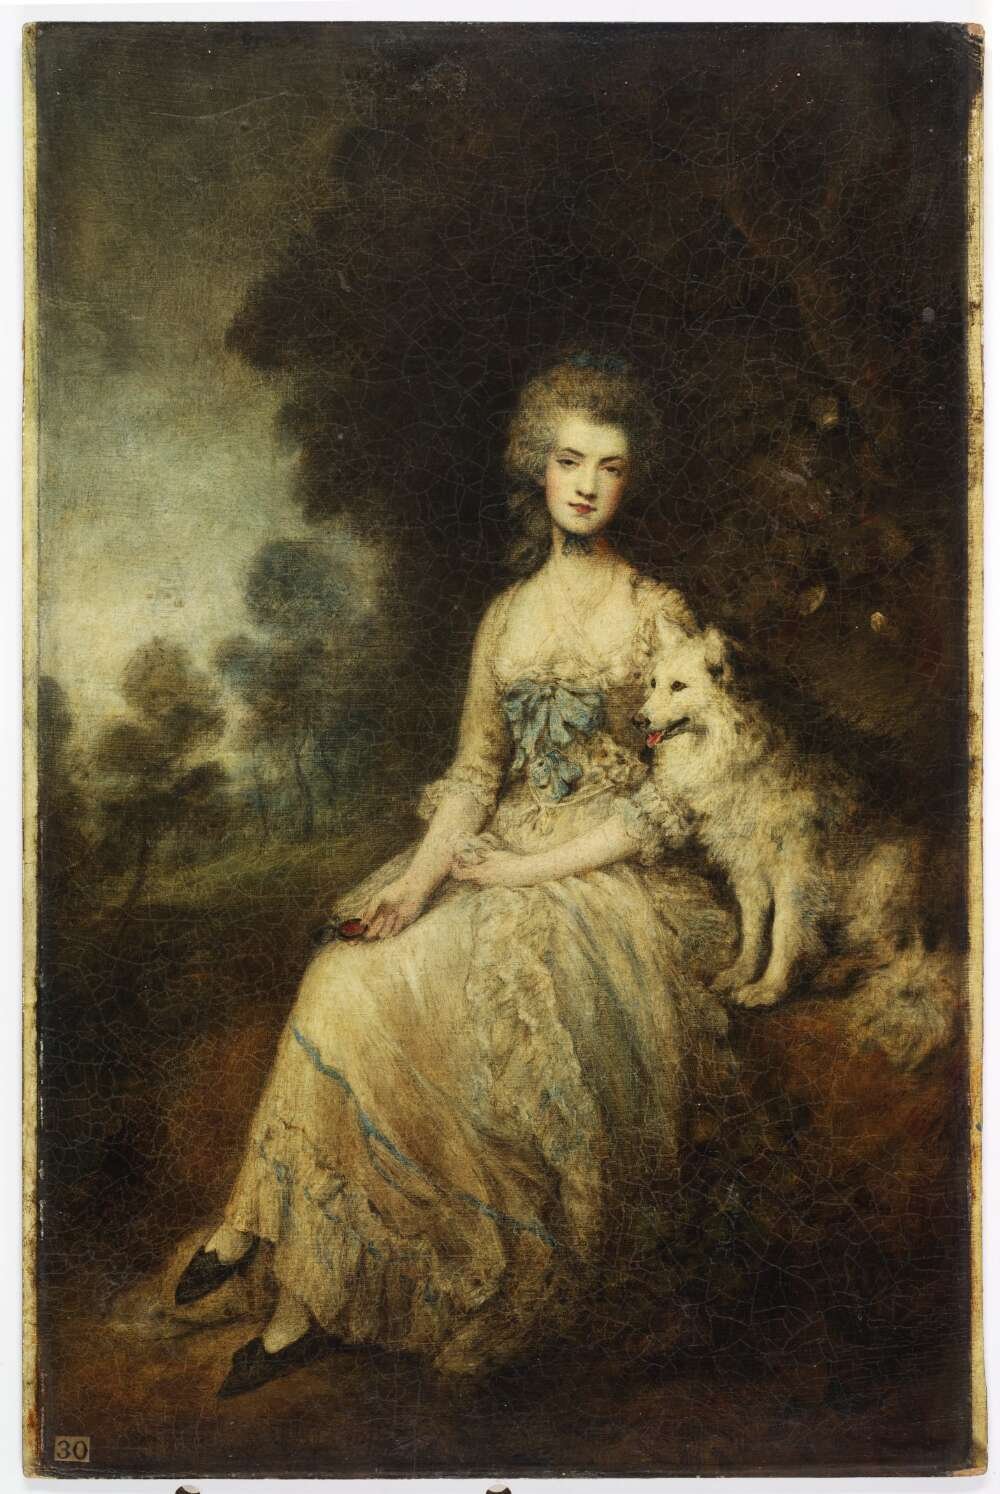 Portrait of Mrs Robinson in a yellow dress looking at the viewer